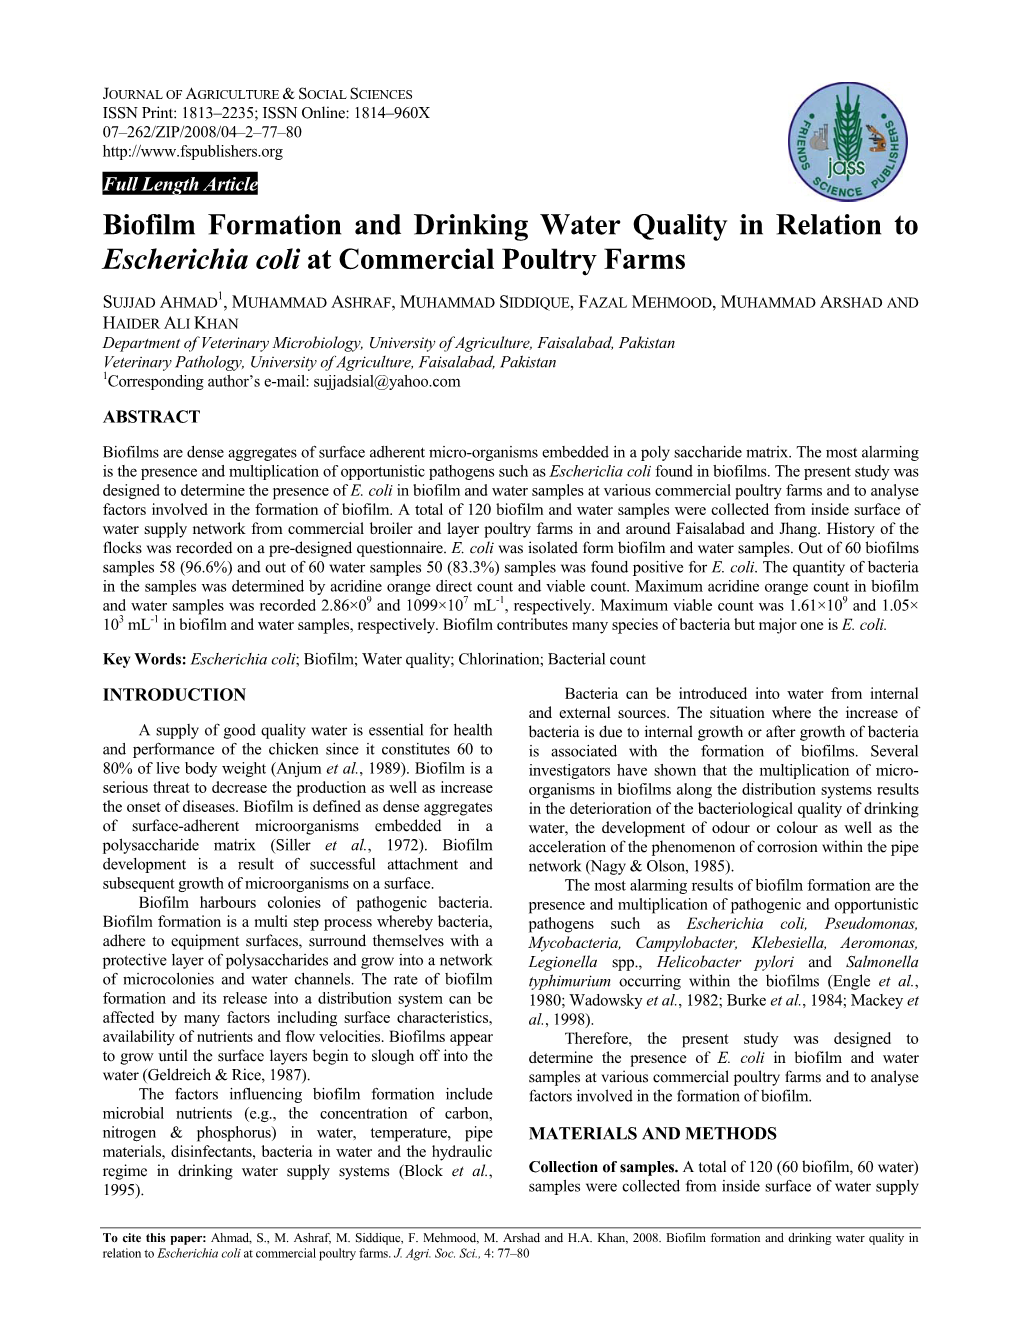 Biofilm Formation and Drinking Water Quality in Relation to Escherichia Coli at Commercial Poultry Farms